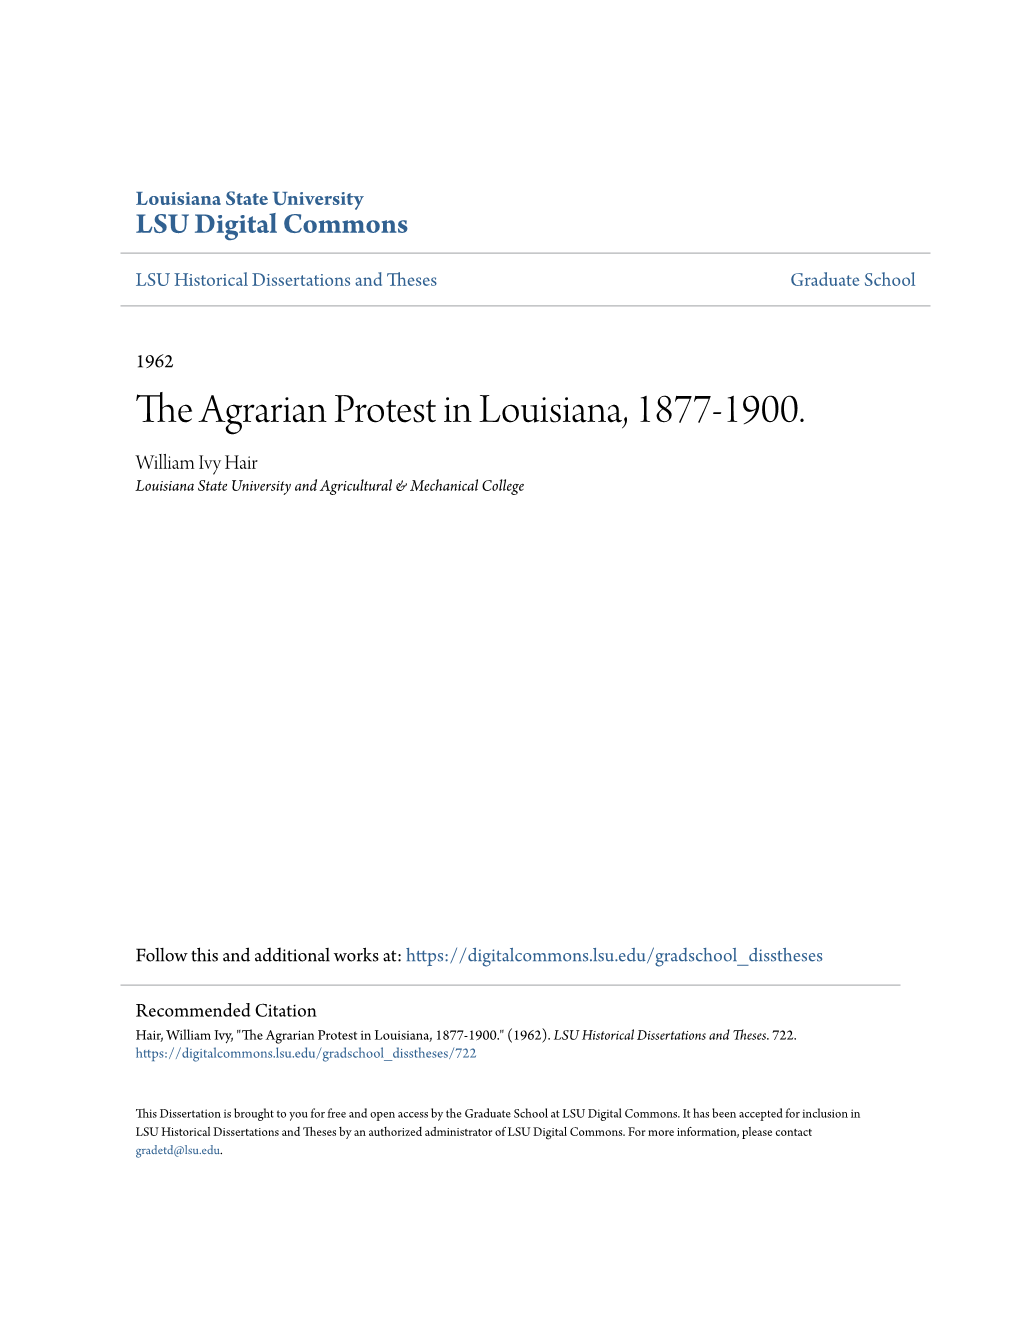 The Agrarian Protest in Louisiana, 1877-1900. William Ivy Hair Louisiana State University and Agricultural & Mechanical College